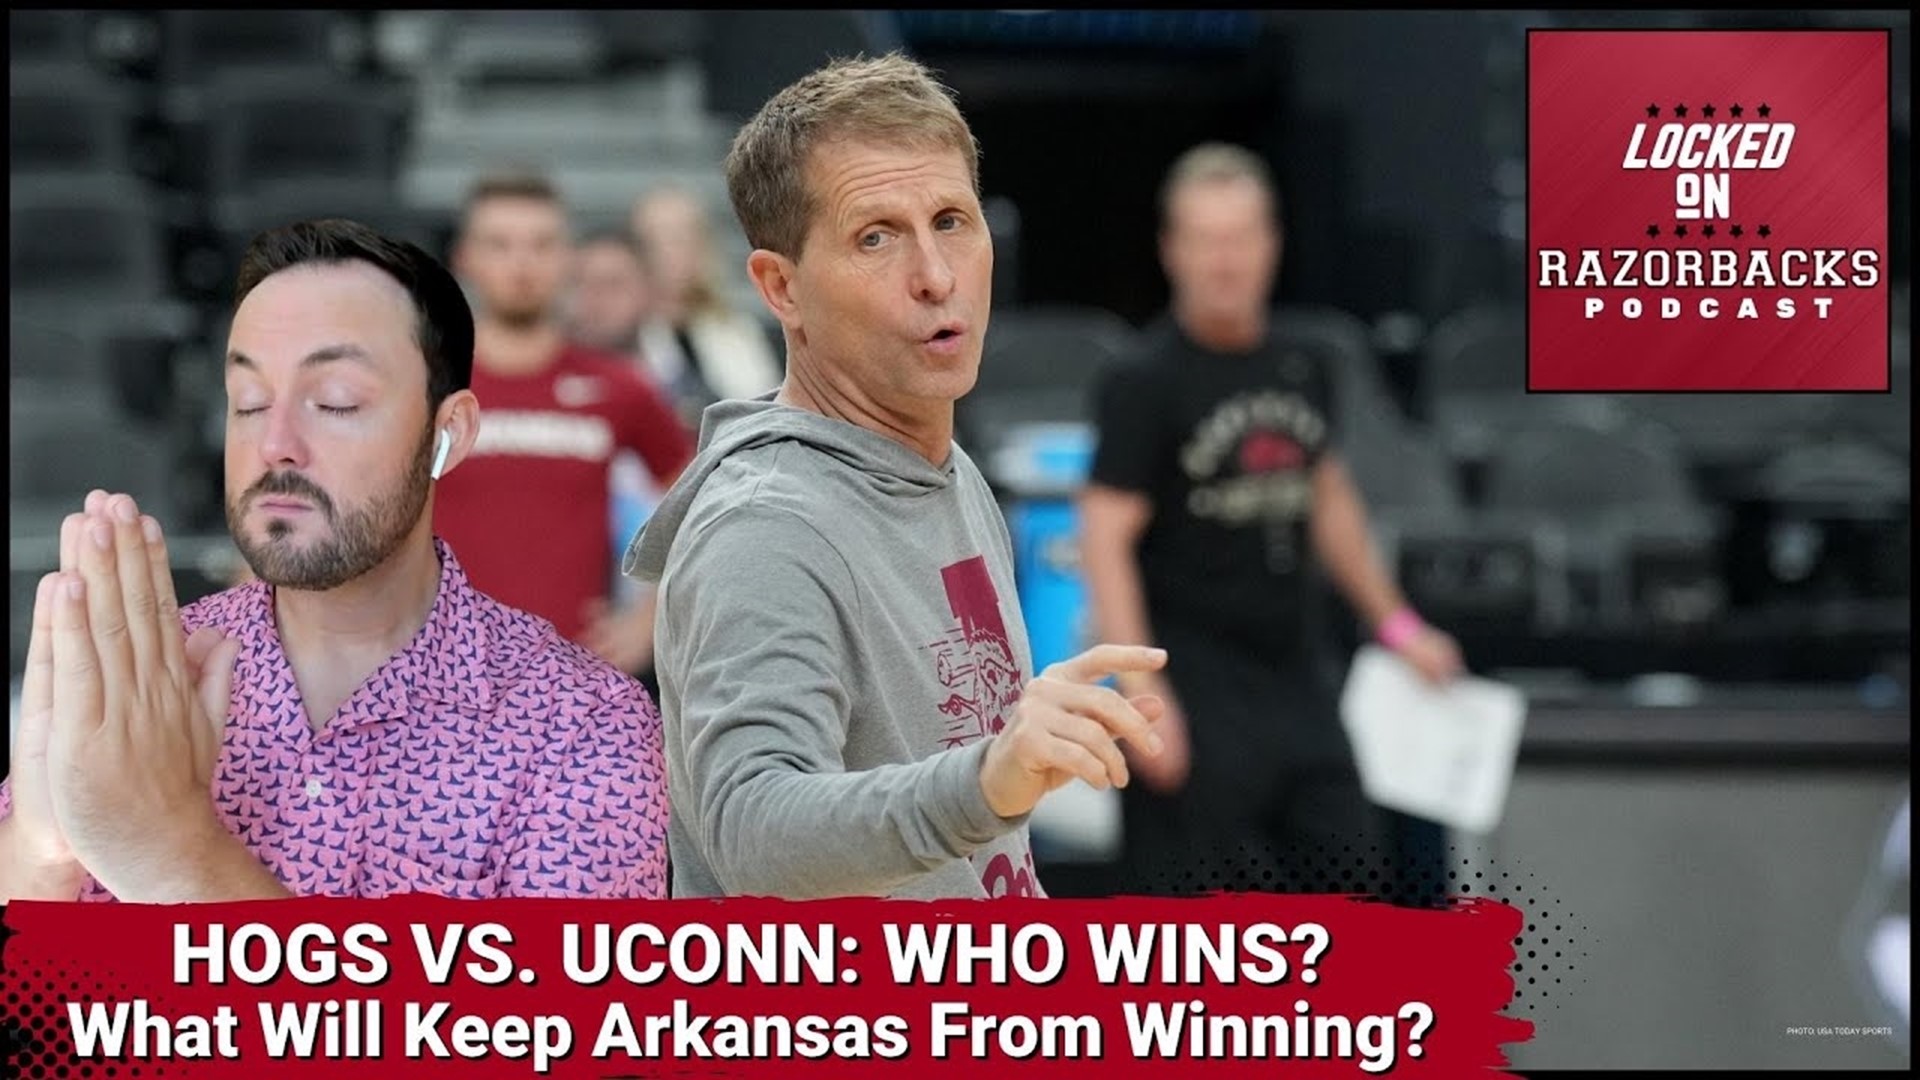 Arkansas is facing off against the UConn Huskies in Las Vegas with a chance at the Elite 8 on the line. How can the Hogs beat another really tough team?